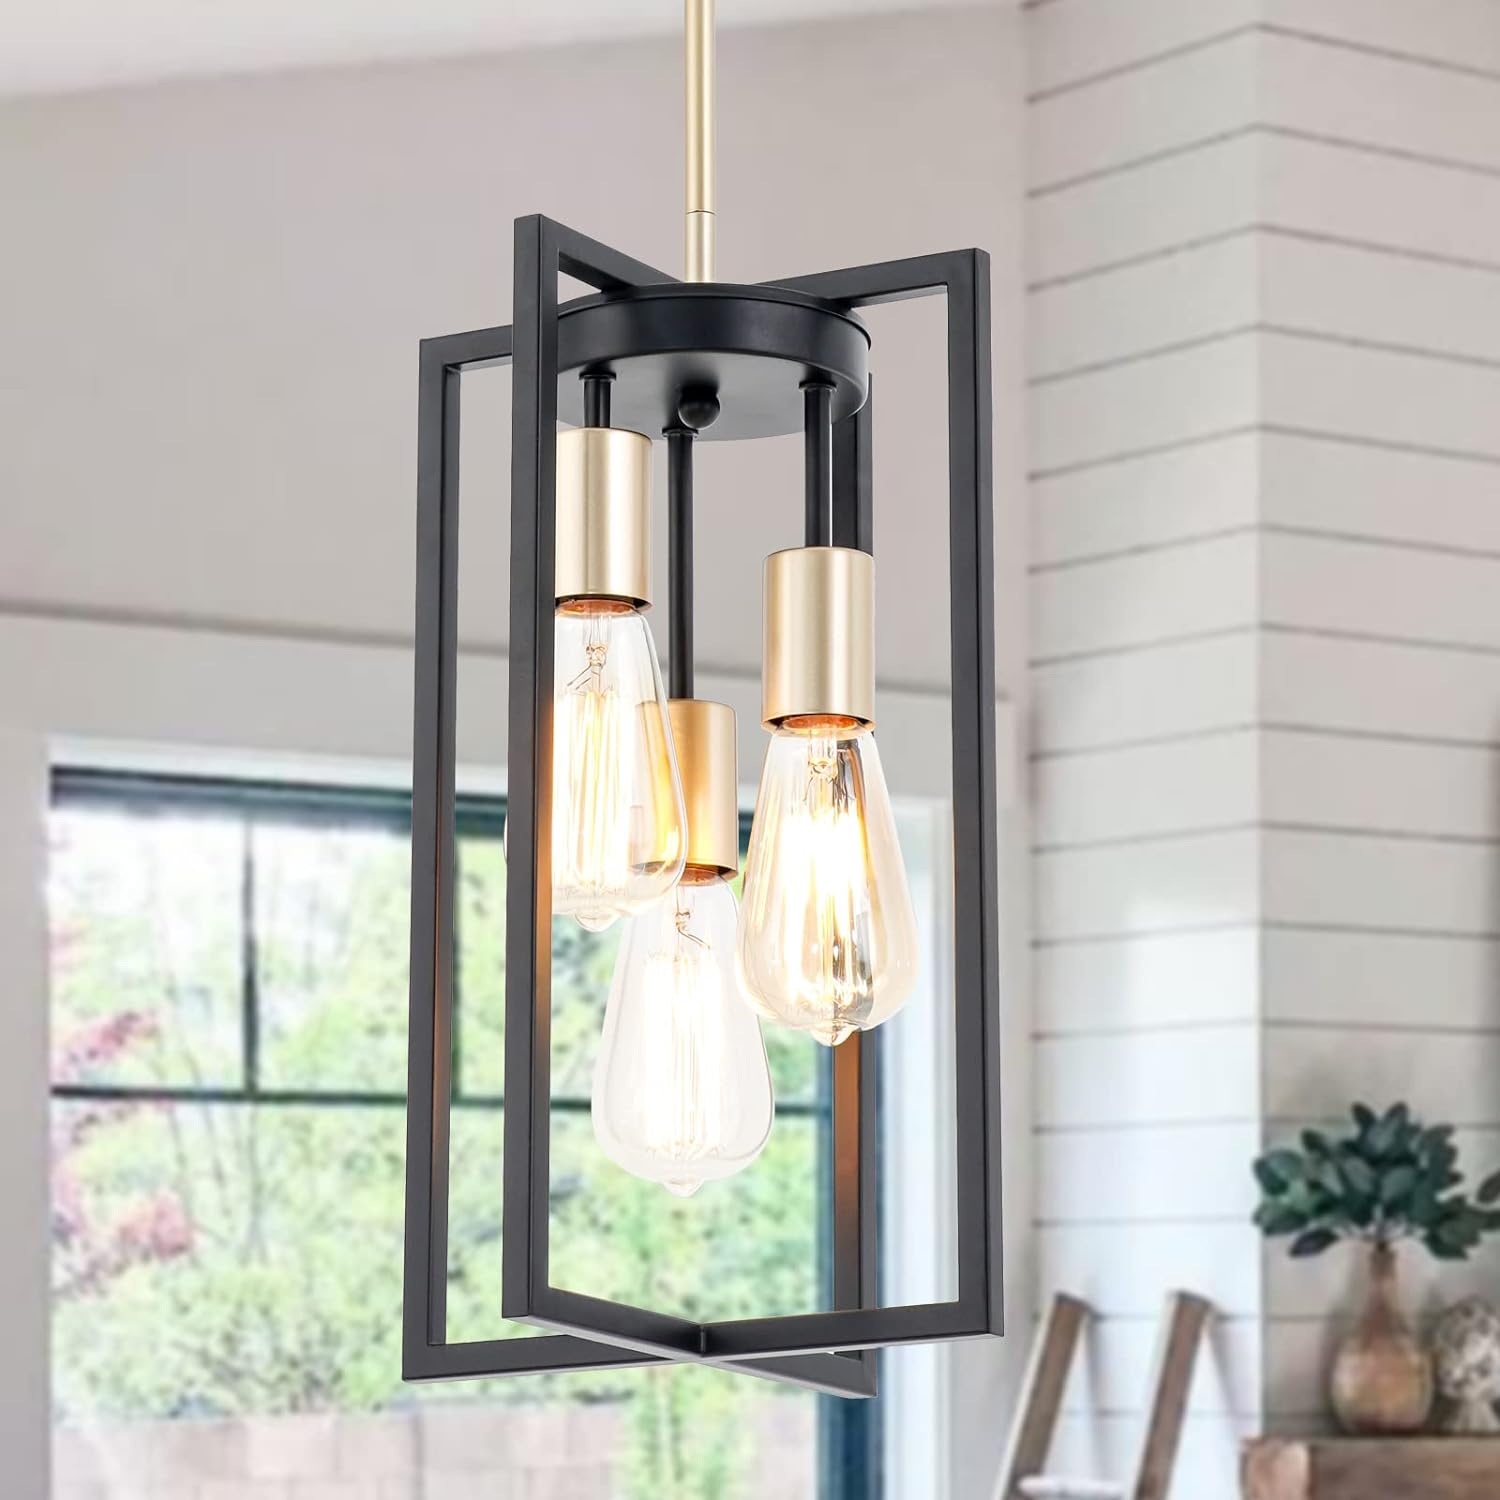 zhkung Industrial Farmhouse Pendant Lights, Rectangle 3-Light Modern Black and Golden Chandelier,Geometric Metal Cage Adjustable Rods